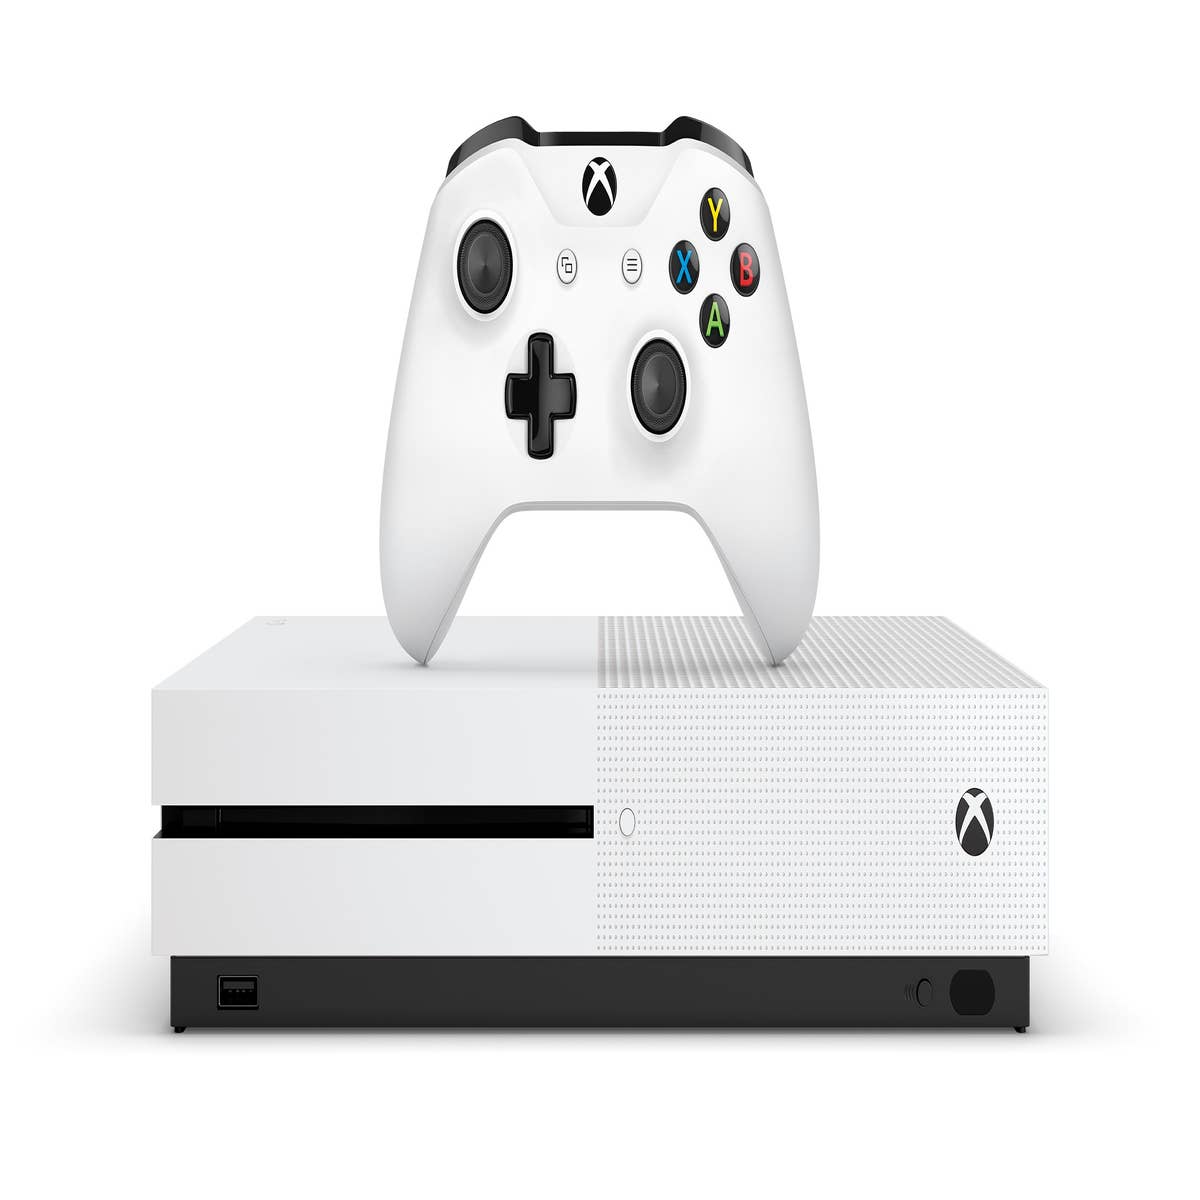 Xbox One S 1TB With Gears of War 4 and Halo 5 Games Consoles